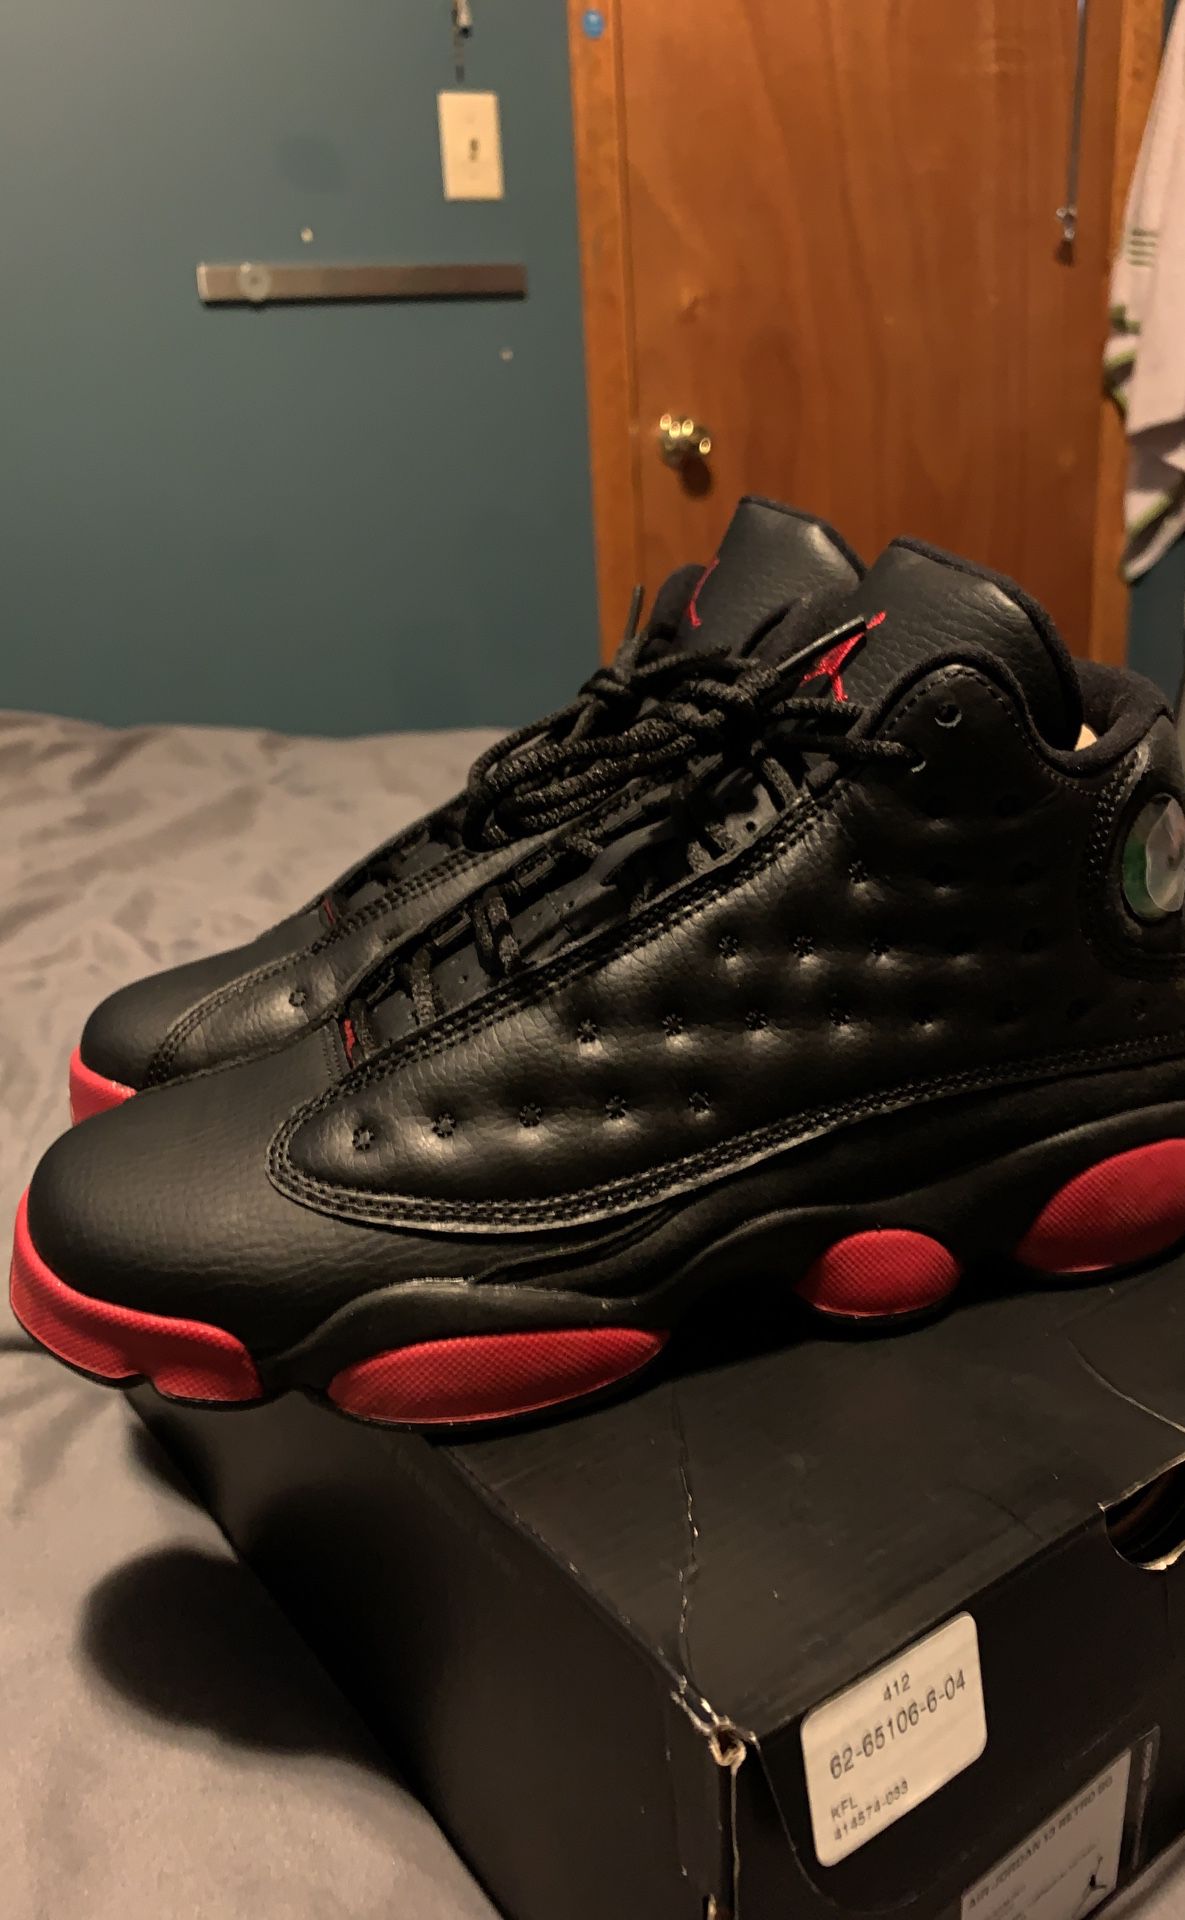 Jordan 13 black and Red Size 7y